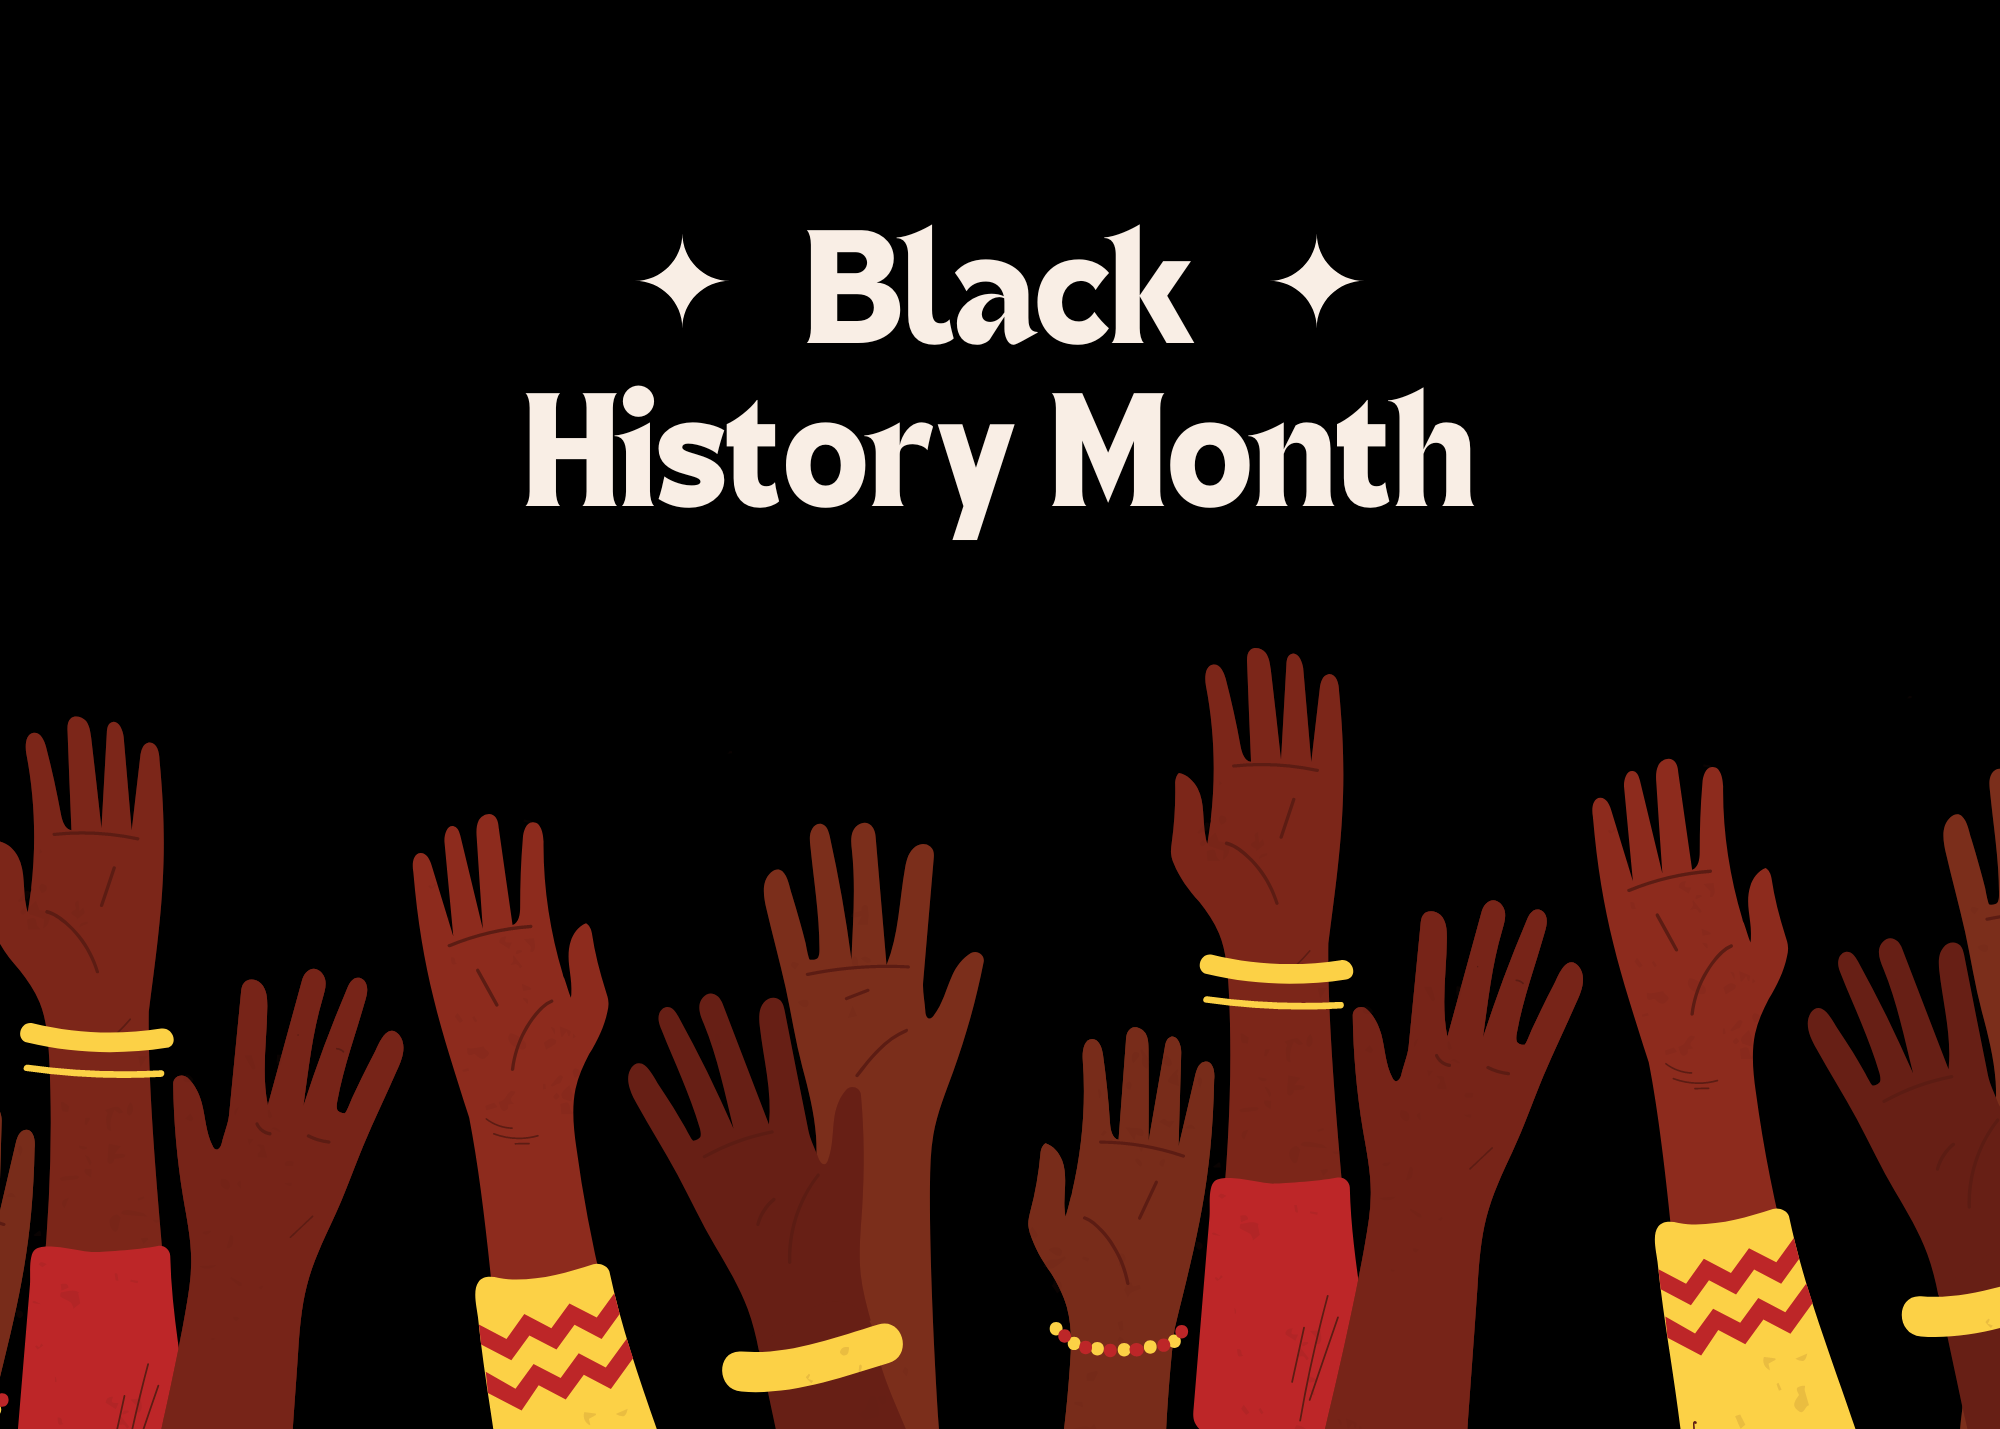 Black History Month- Our favorite black influencers